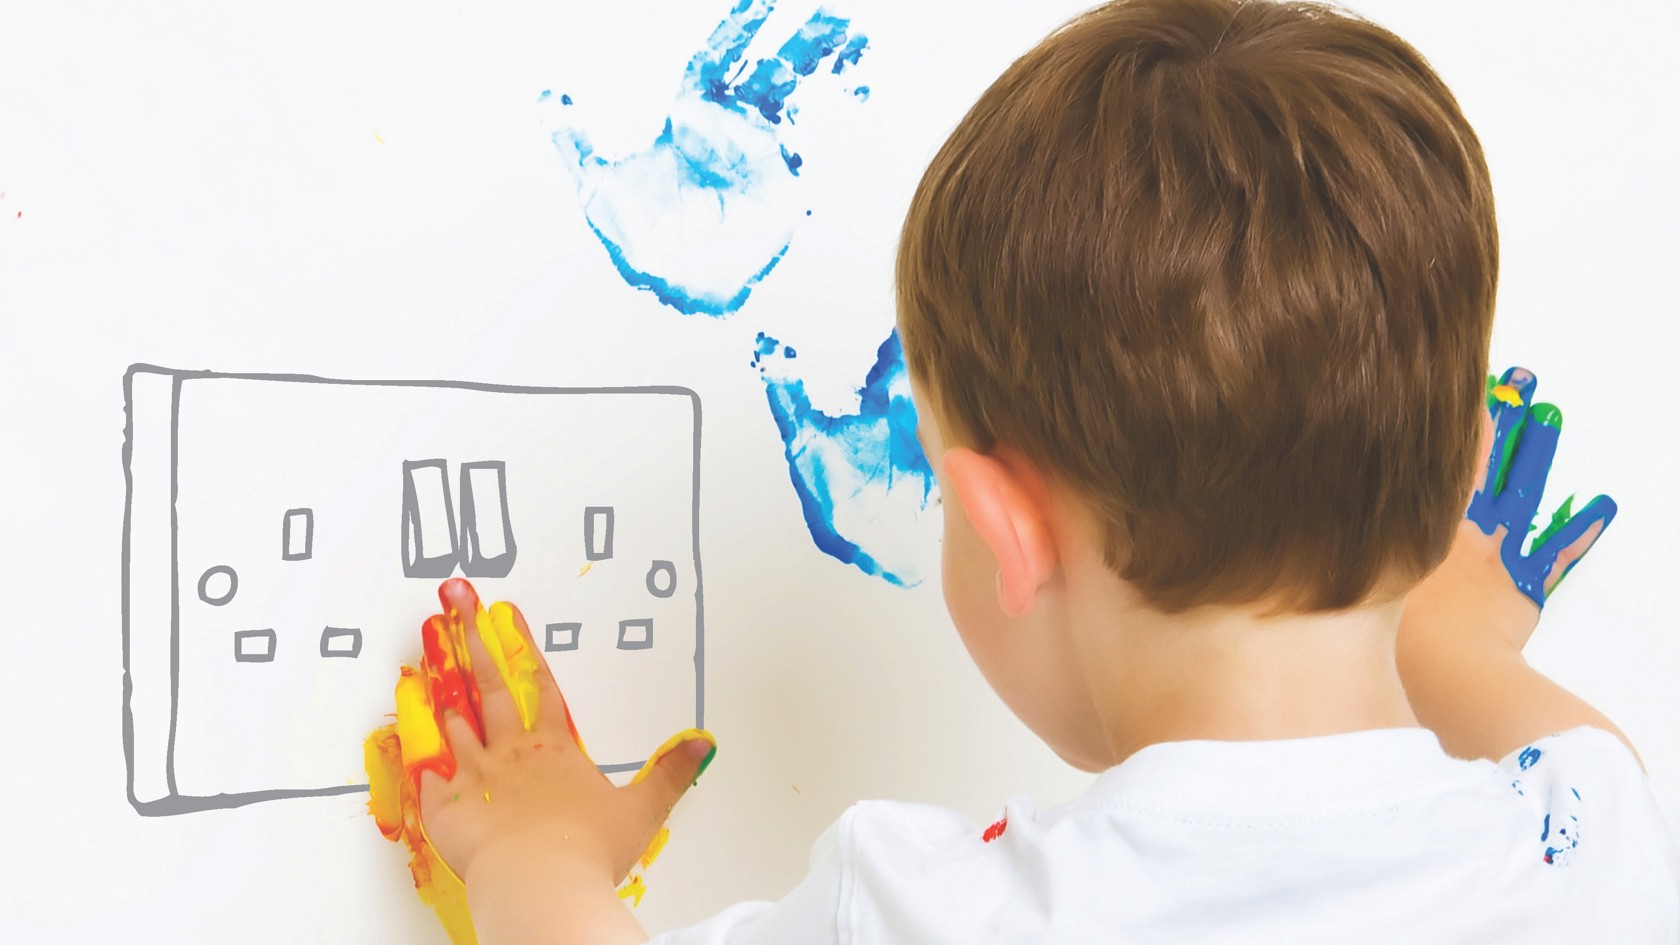 A child with paint on their hands plays with an imaginary power socket